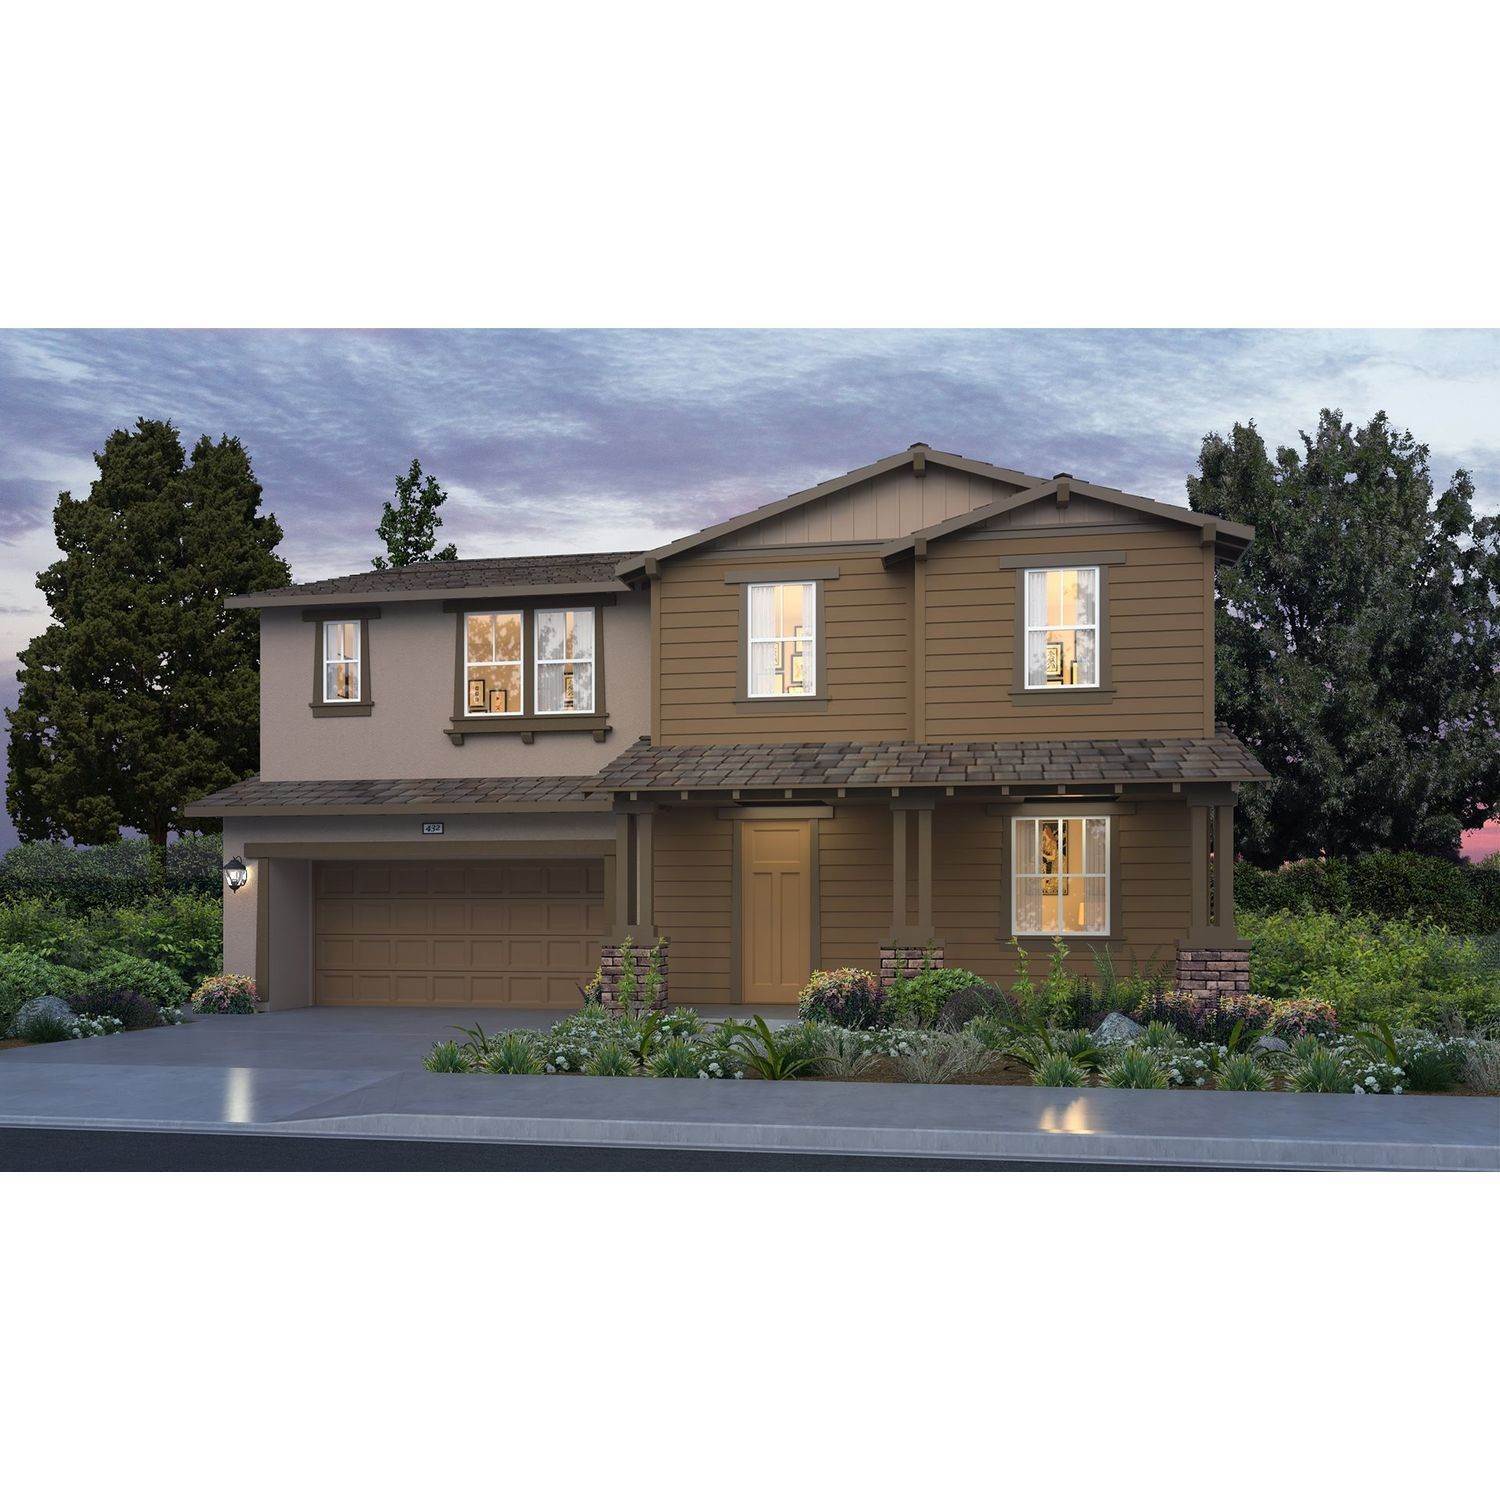 2. Single Family for Sale at Parklane - Everly - Residence One 3332 East Kane Drive ONTARIO, CALIFORNIA 91762 UNITED STATES